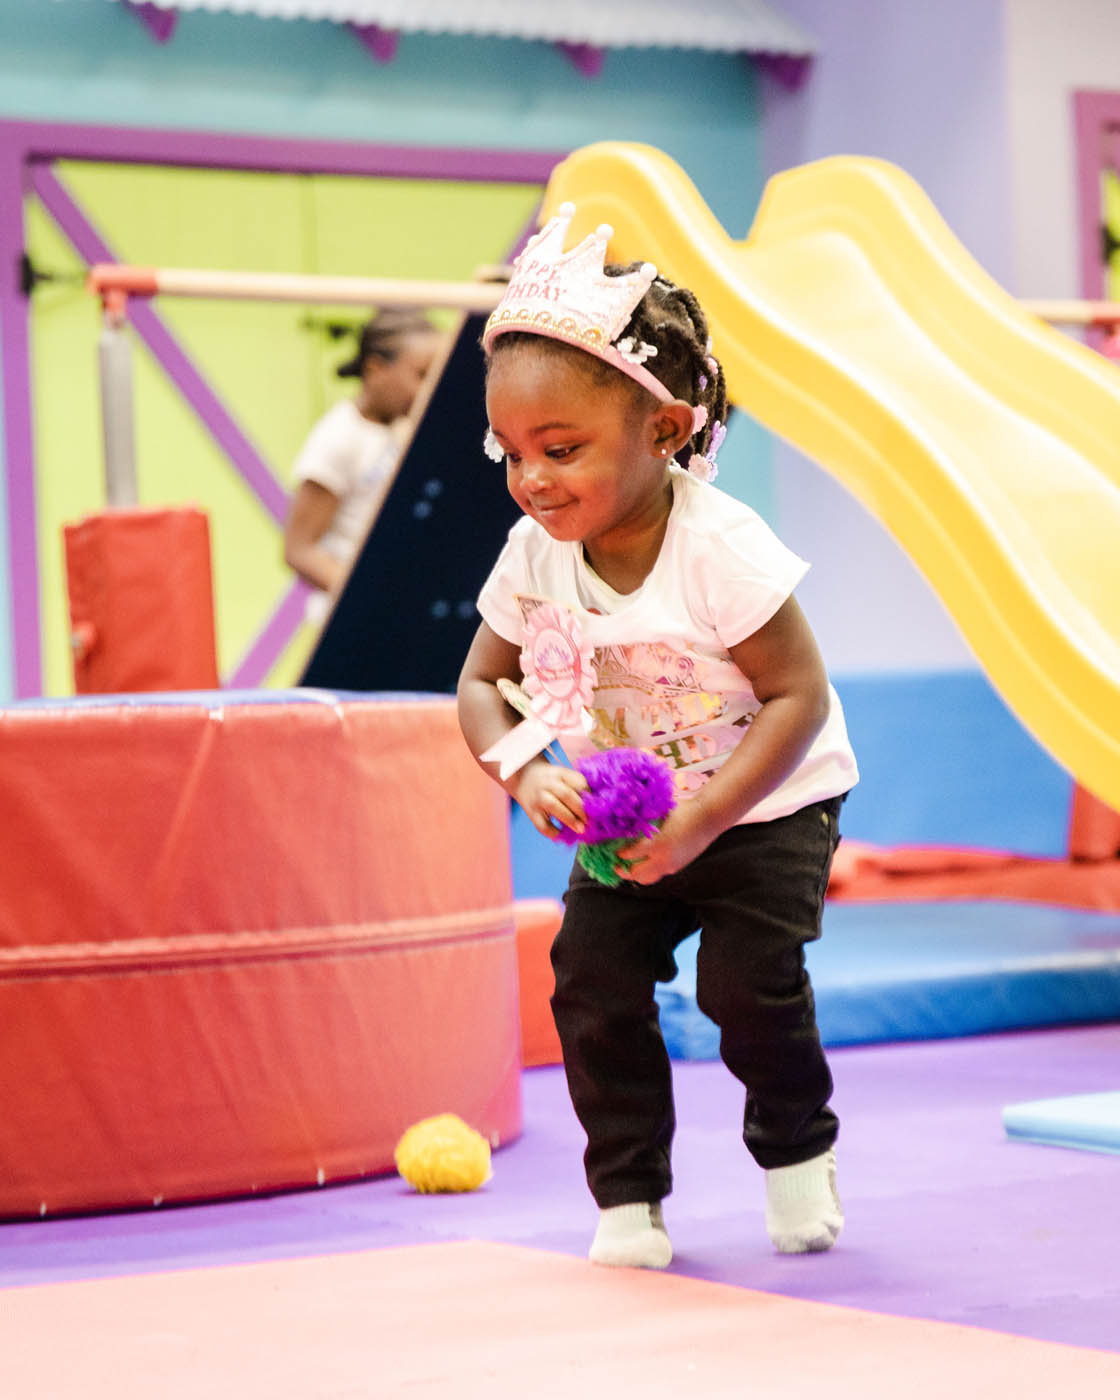 A little girl enjoying her b day party at Romp n' Roll Pittsburgh kids birthday party places.